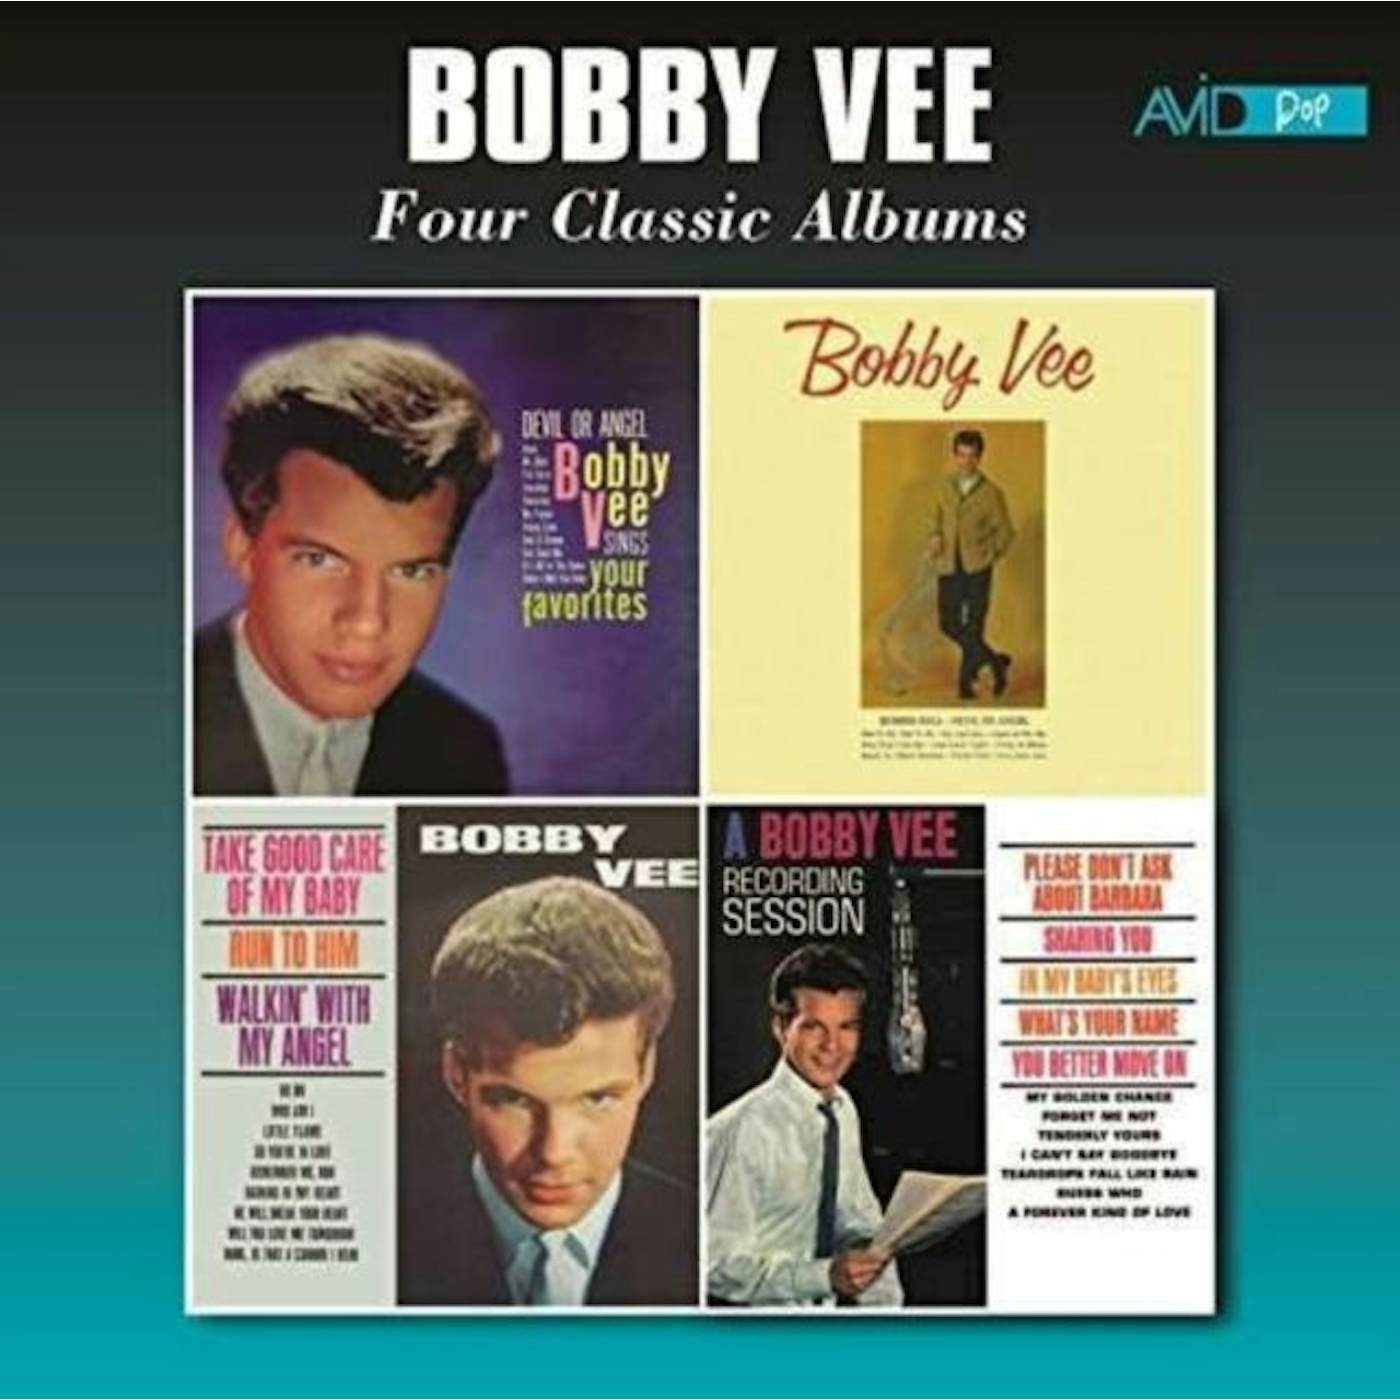 Bobby Vee CD - Four Classic Albums (Bobby Vee Sings Your Favorites / Bobby Vee / Take Good Care Of My Baby / A Bobby Vee Recording Session)